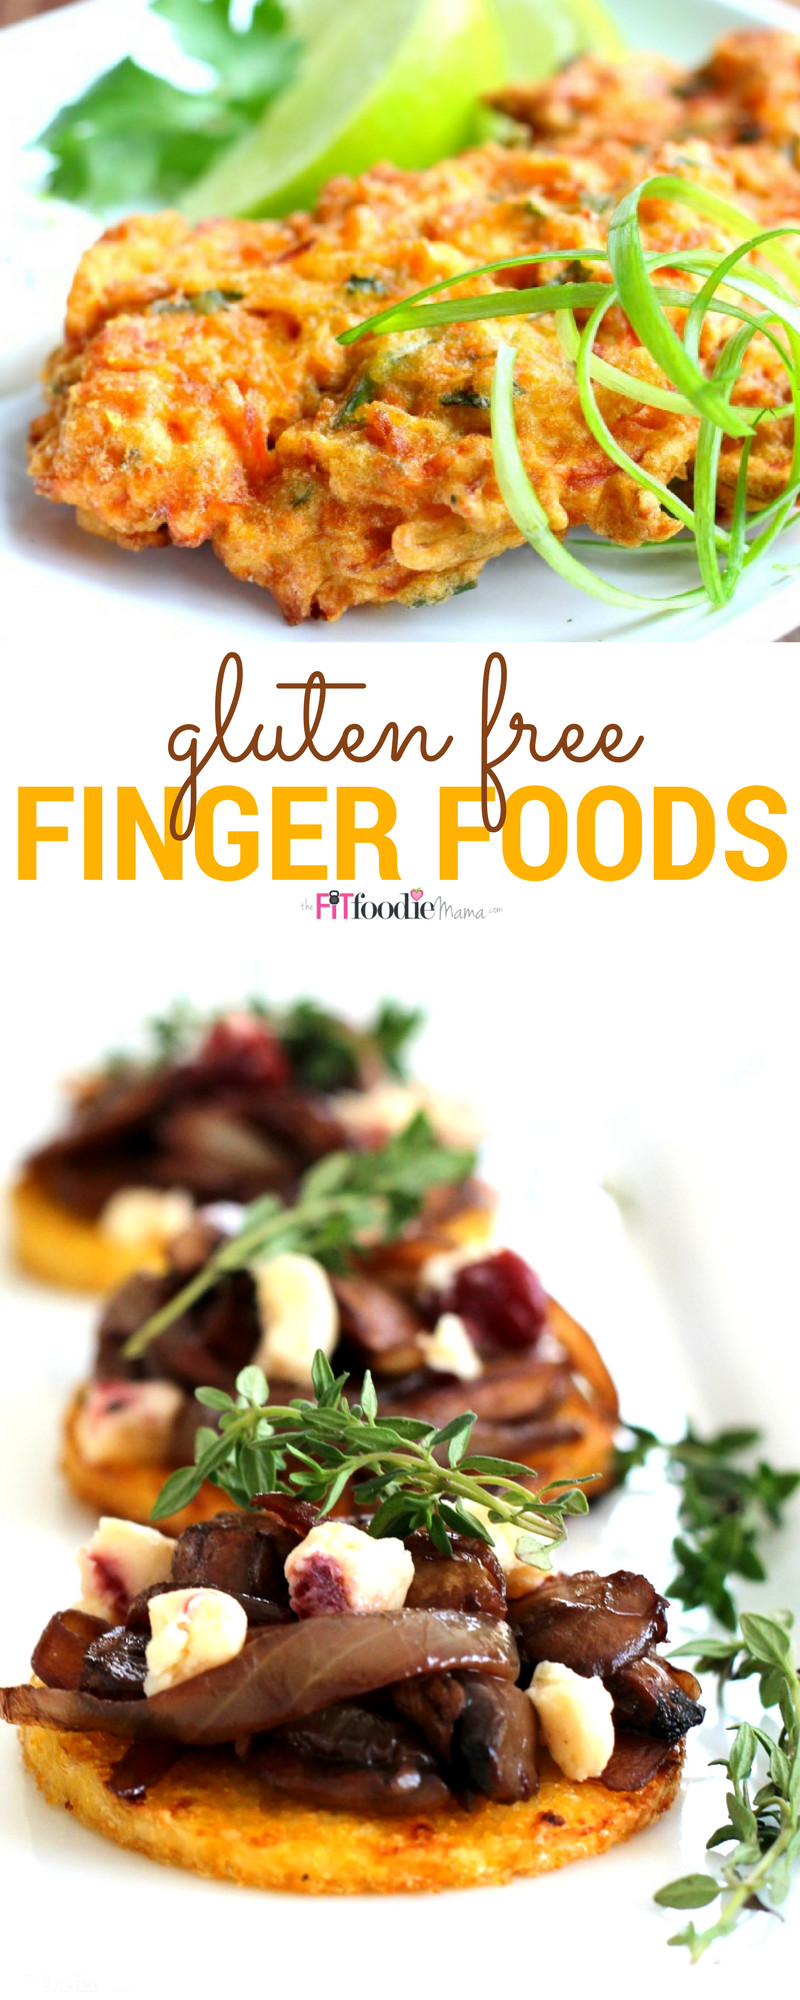 Gluten Free Vegetarian Appetizers
 Gluten Free Finger Foods for the Holidays